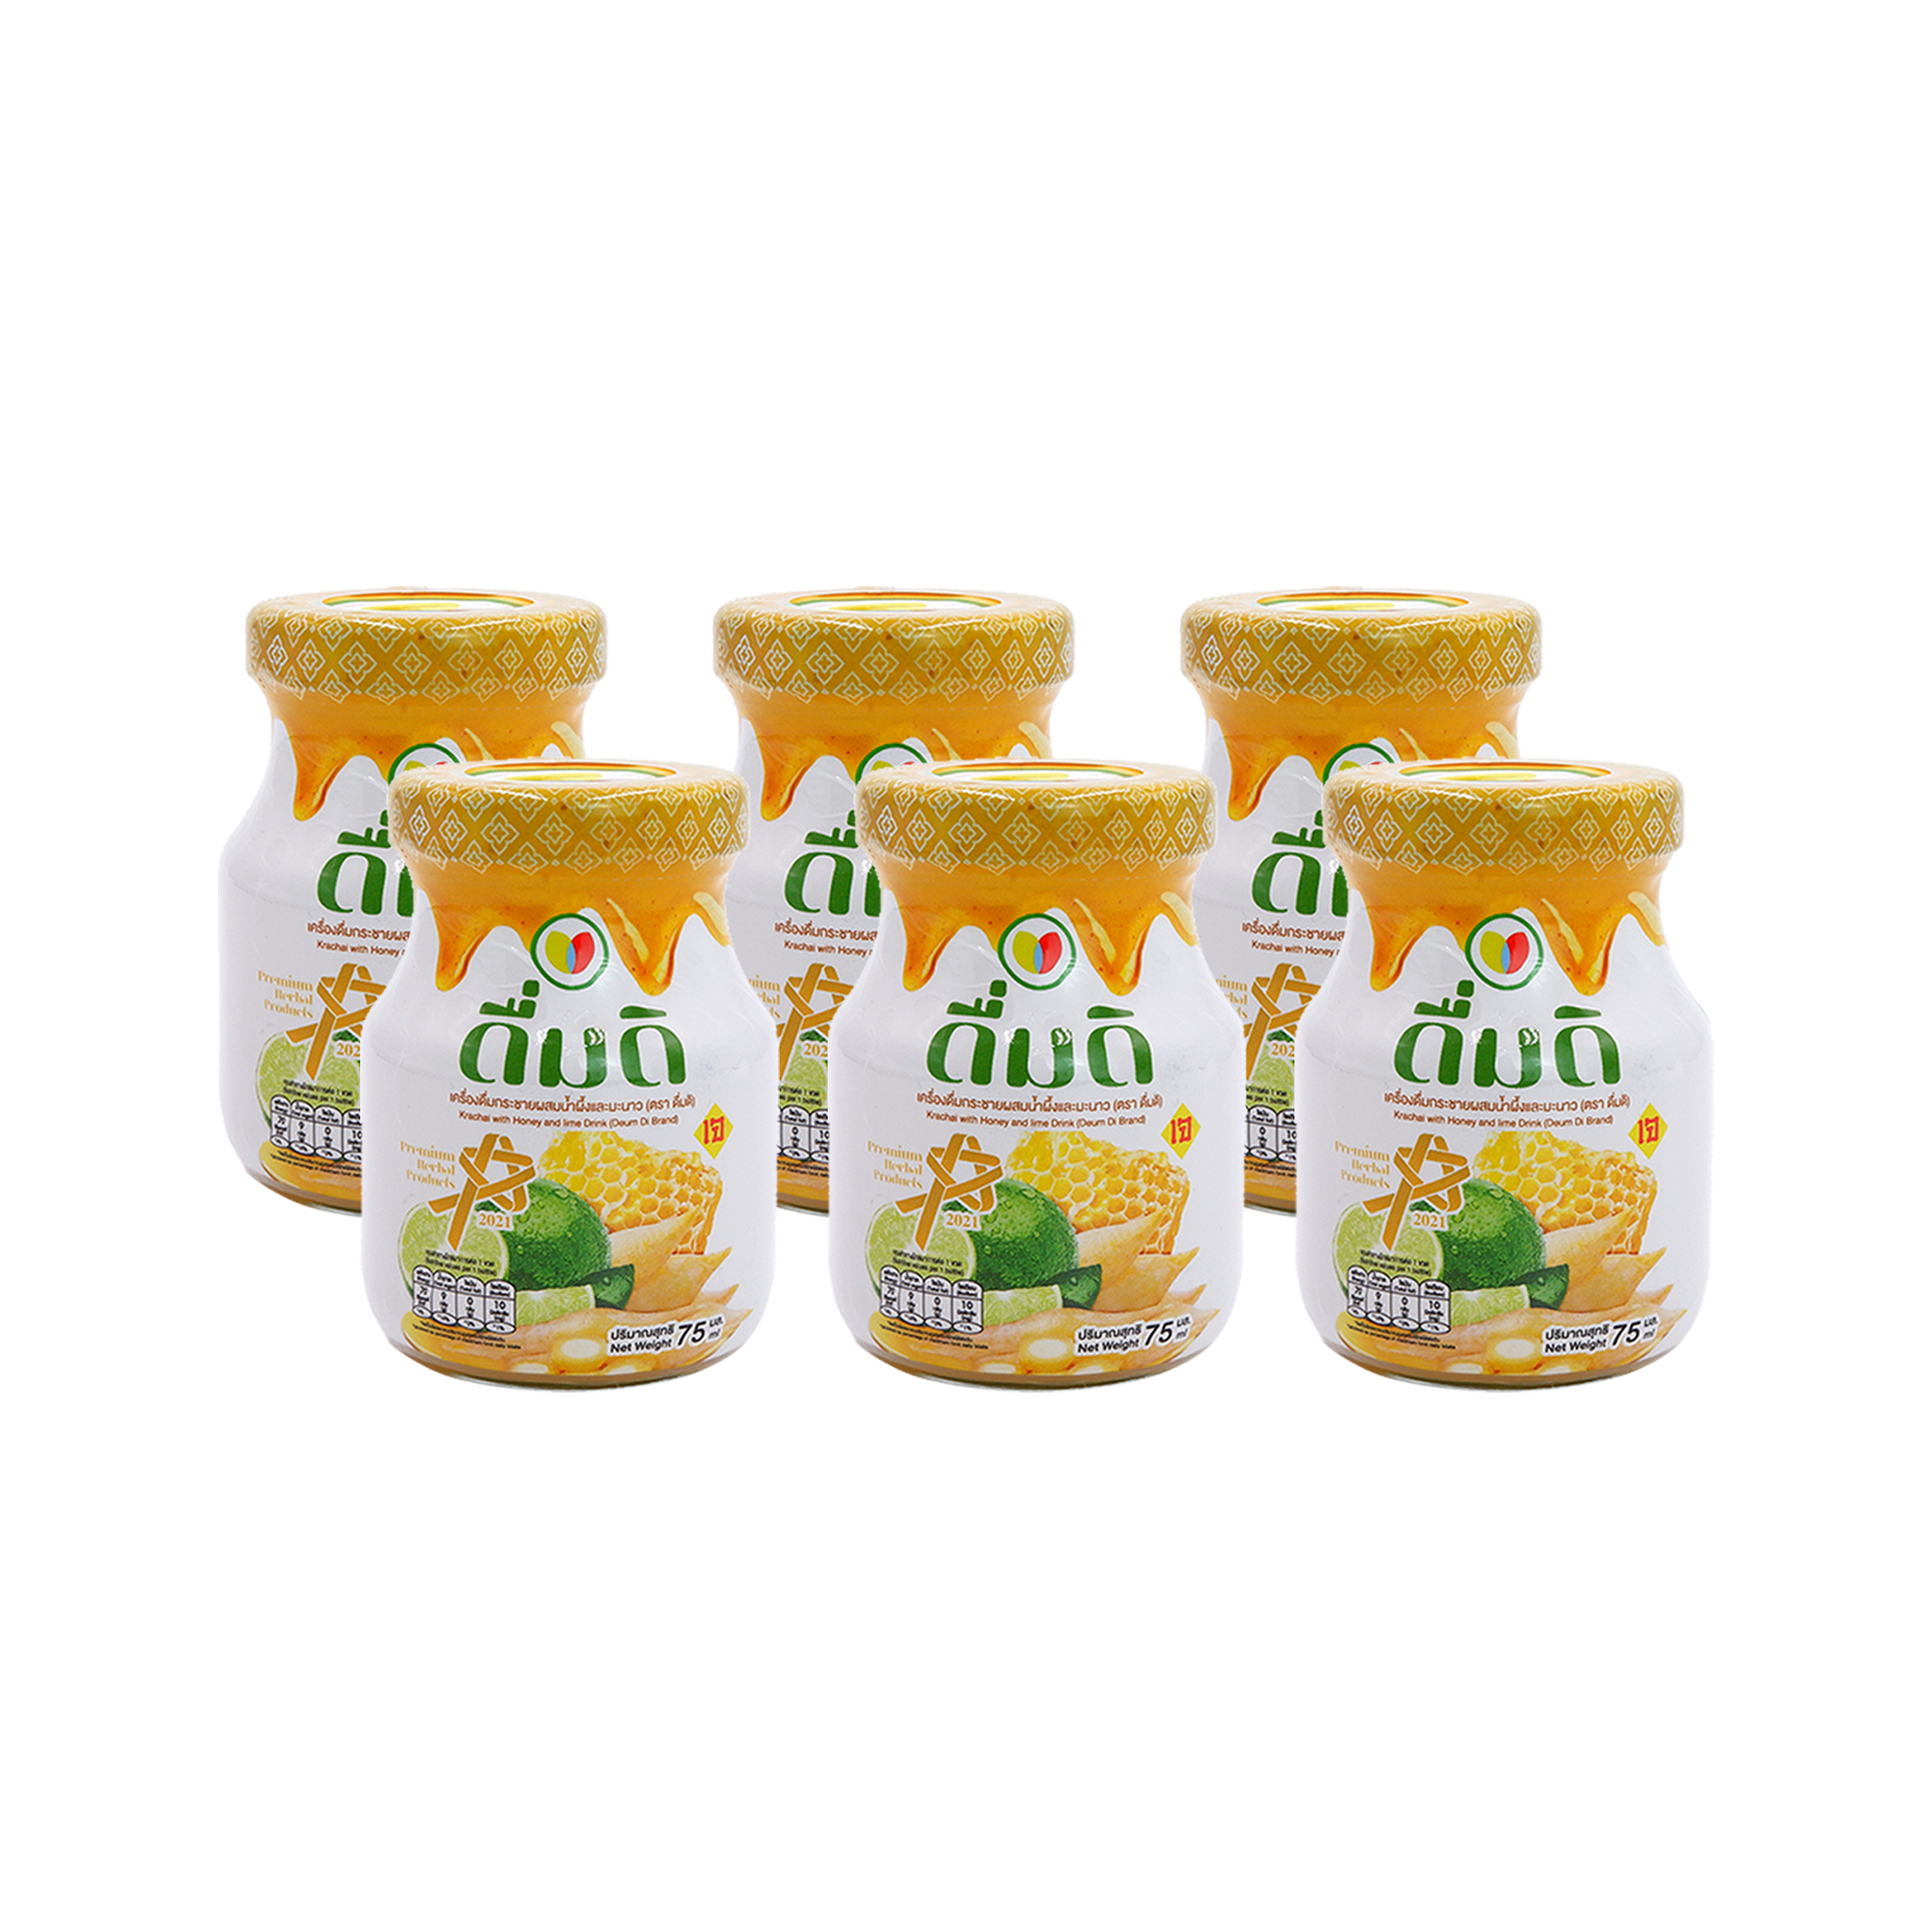 Krachai with Honey and lime Drink (Deum Di Brand) x 6 pcs